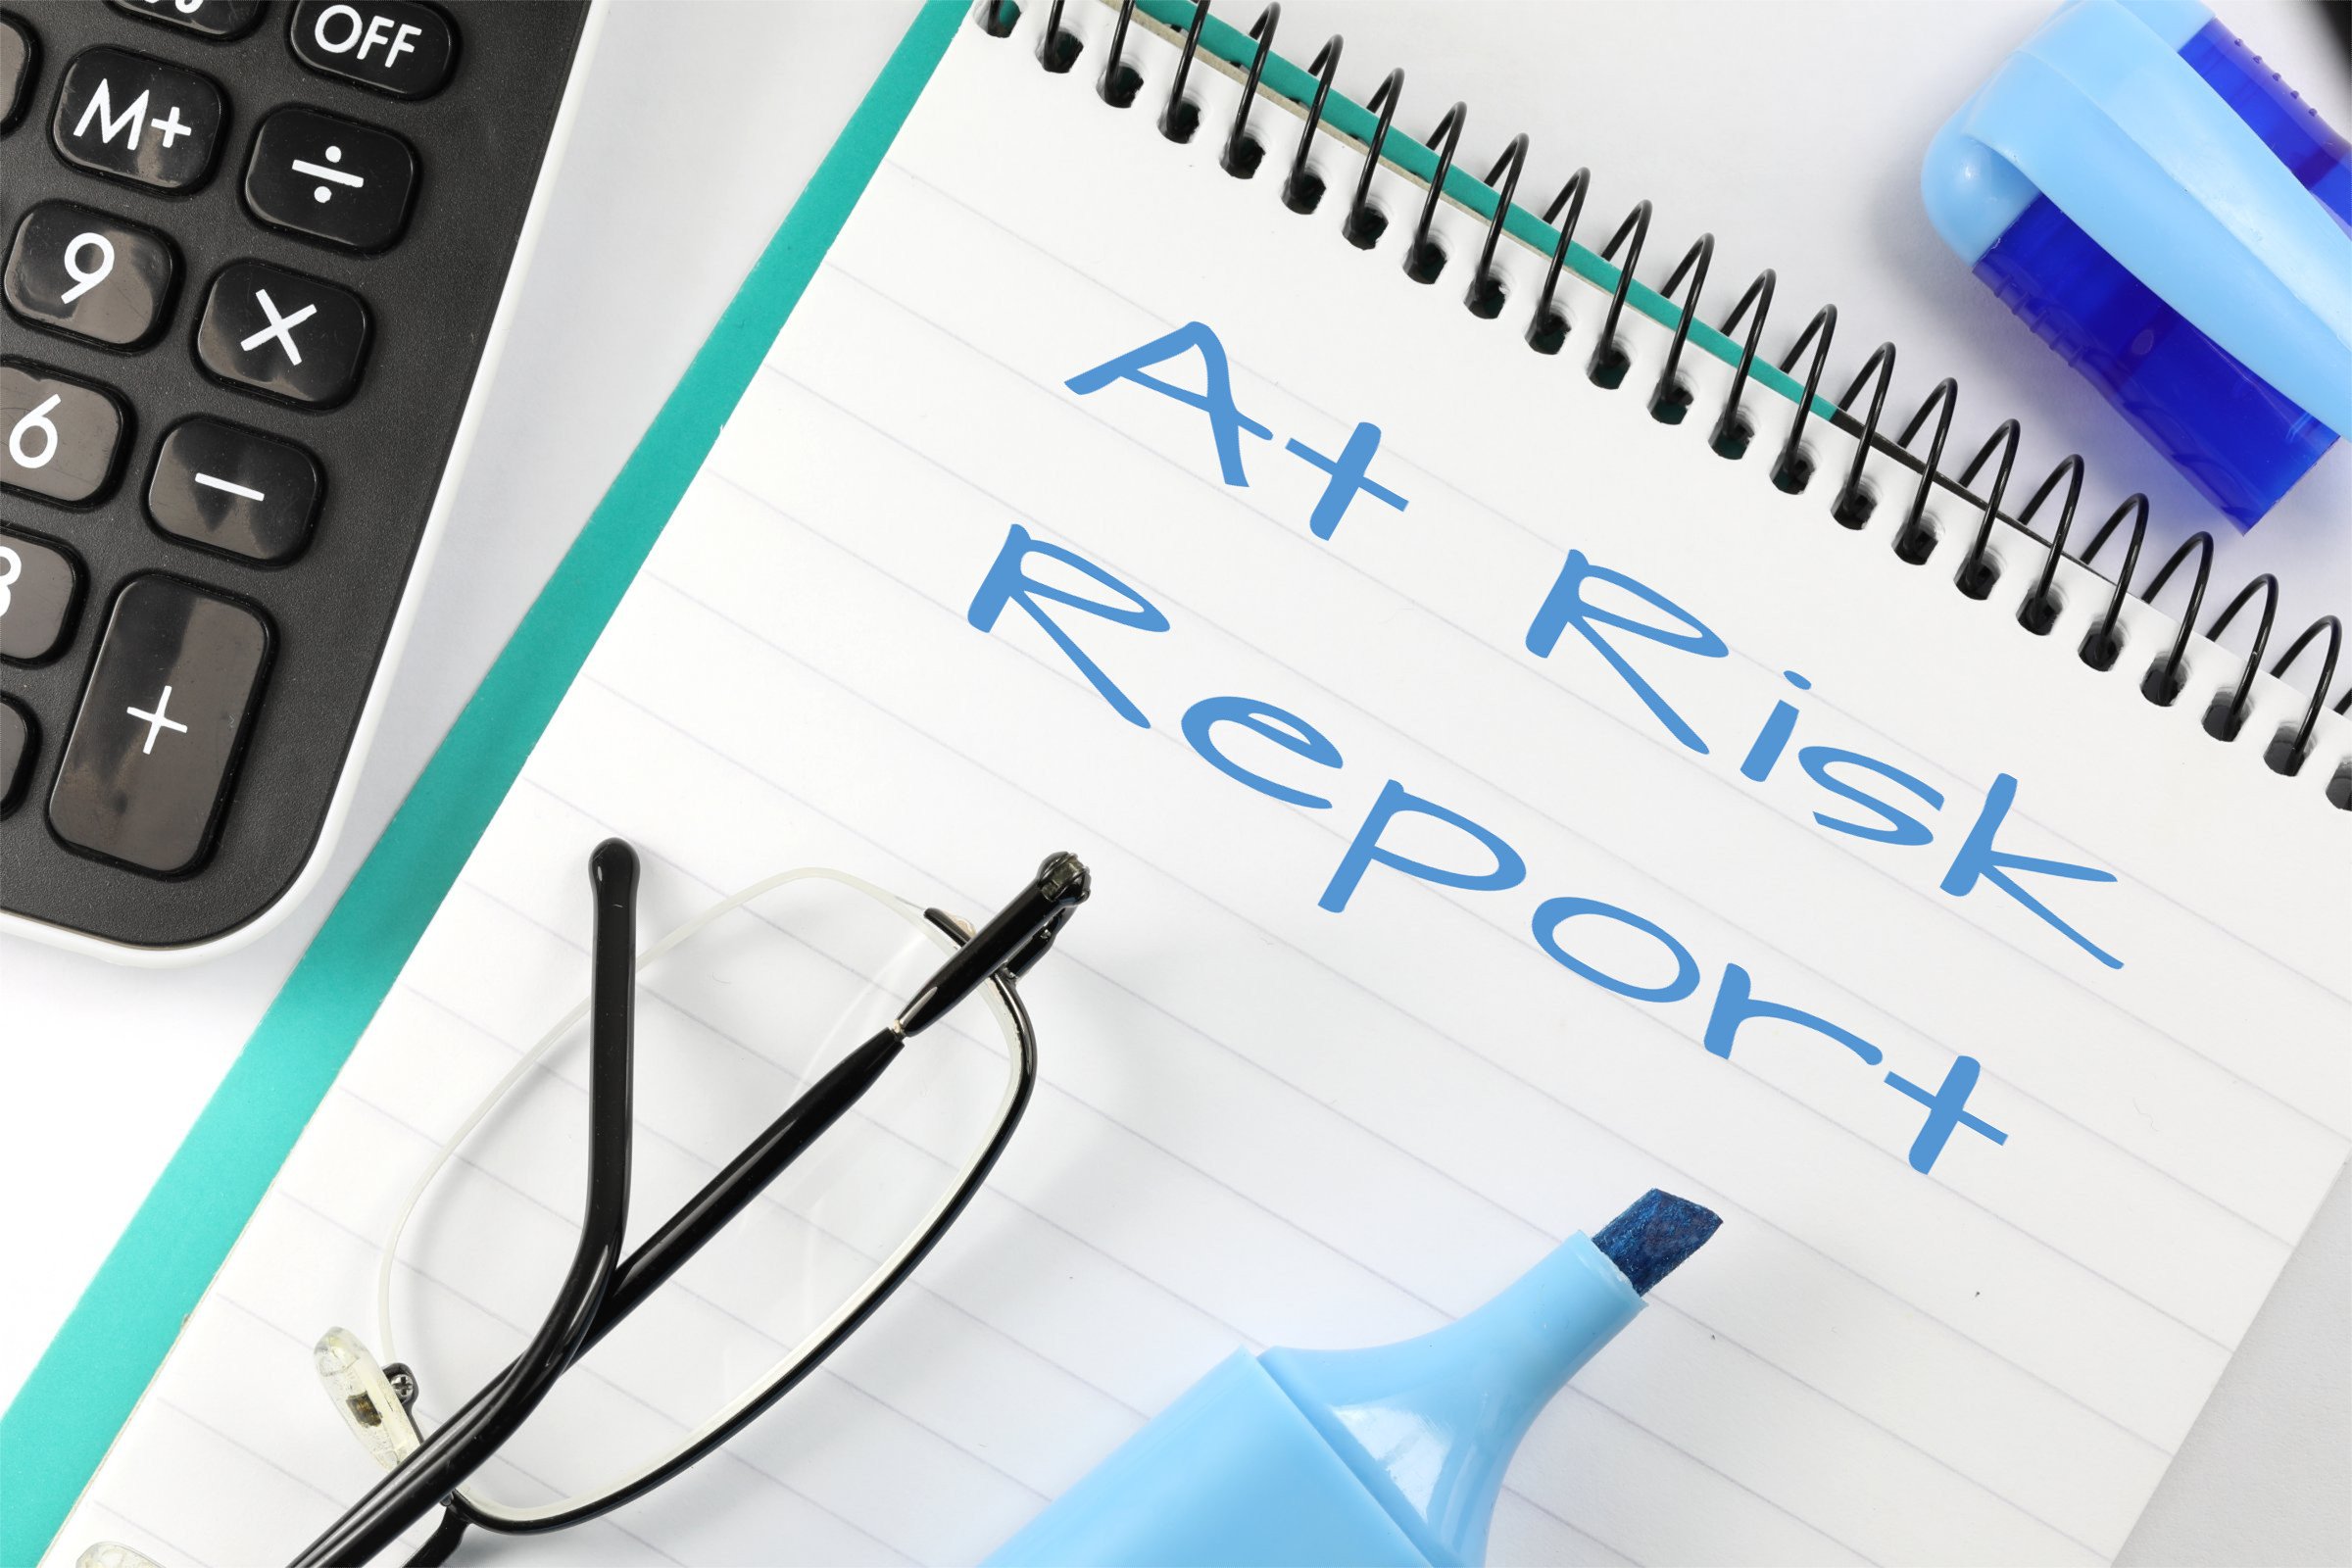 at risk report